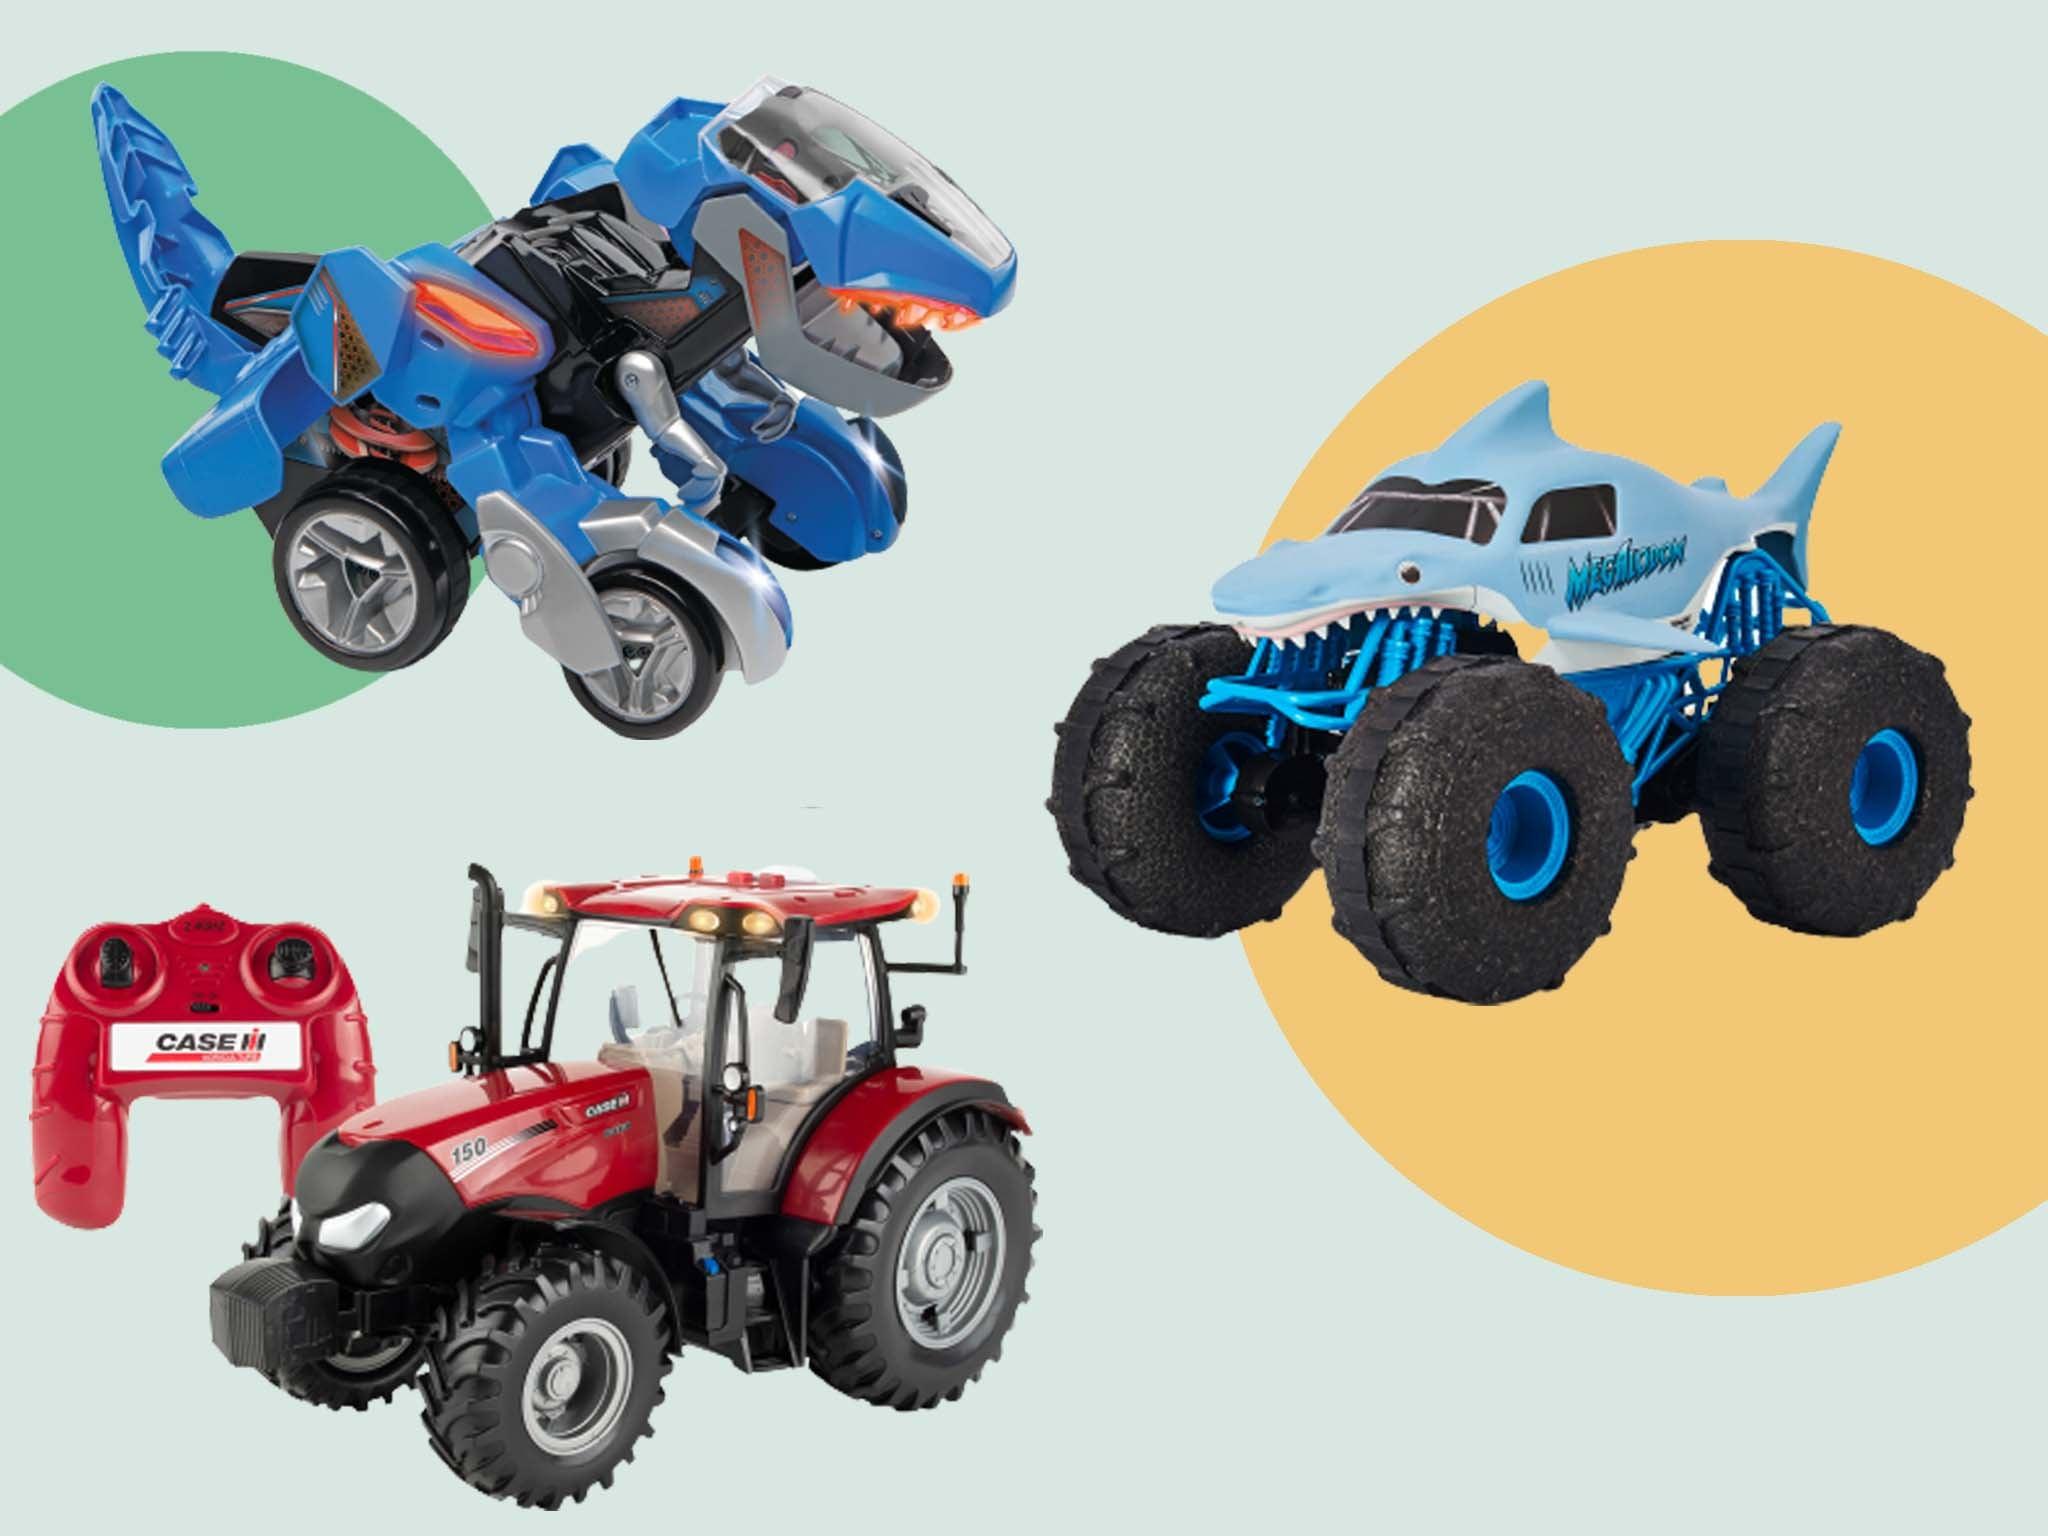 Rc All Terrain Vehicle: Compete in Exciting RC ATV Events